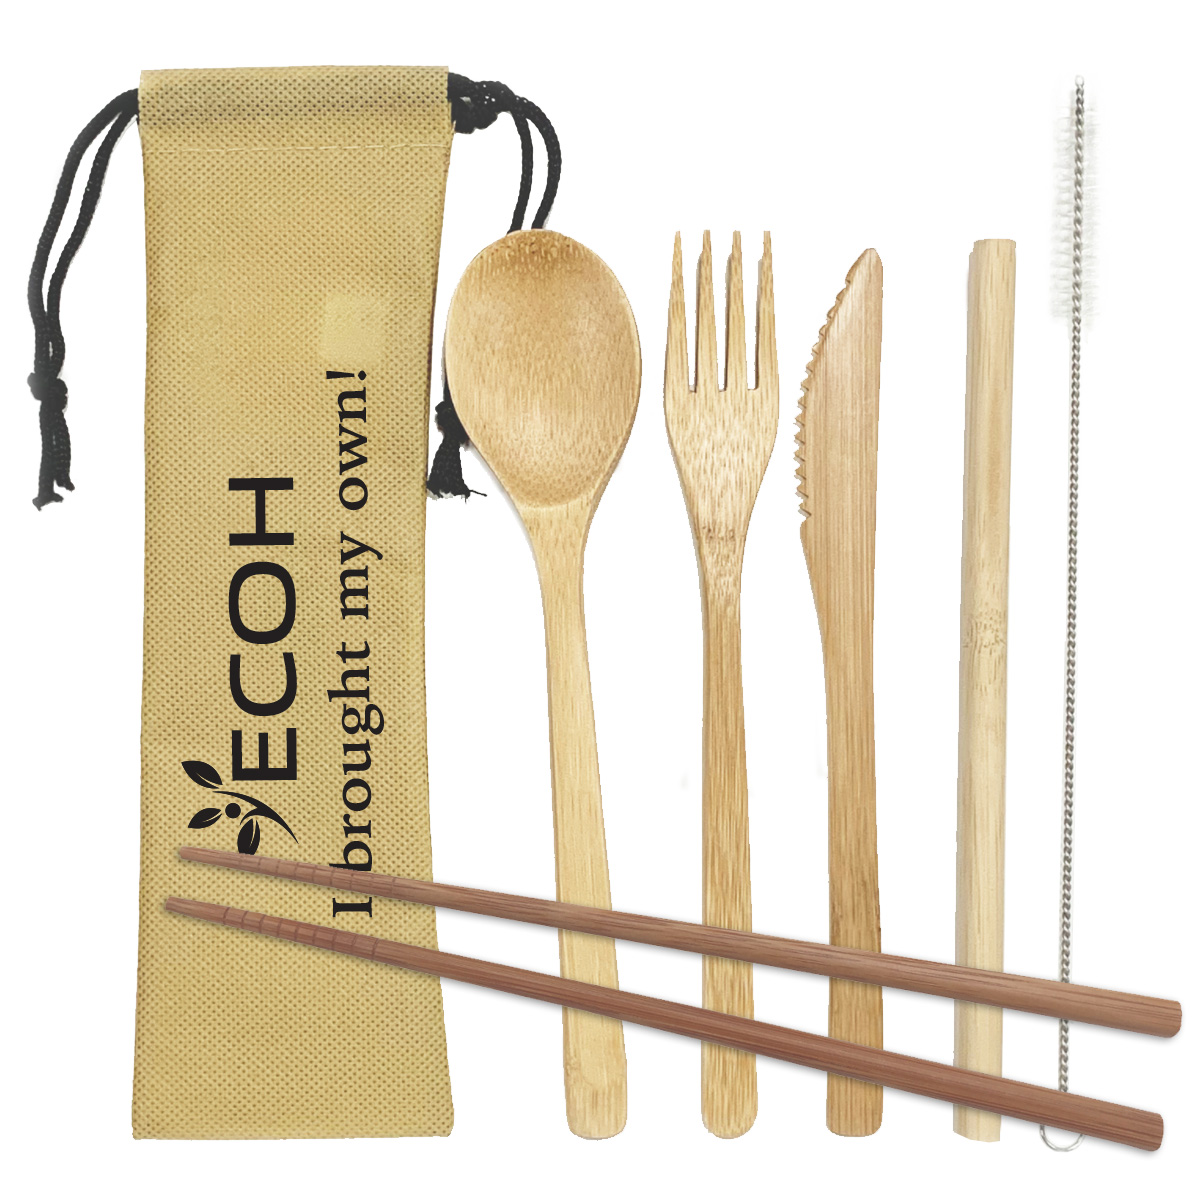 Branded reusable utensils with chopsticks straw cleaner